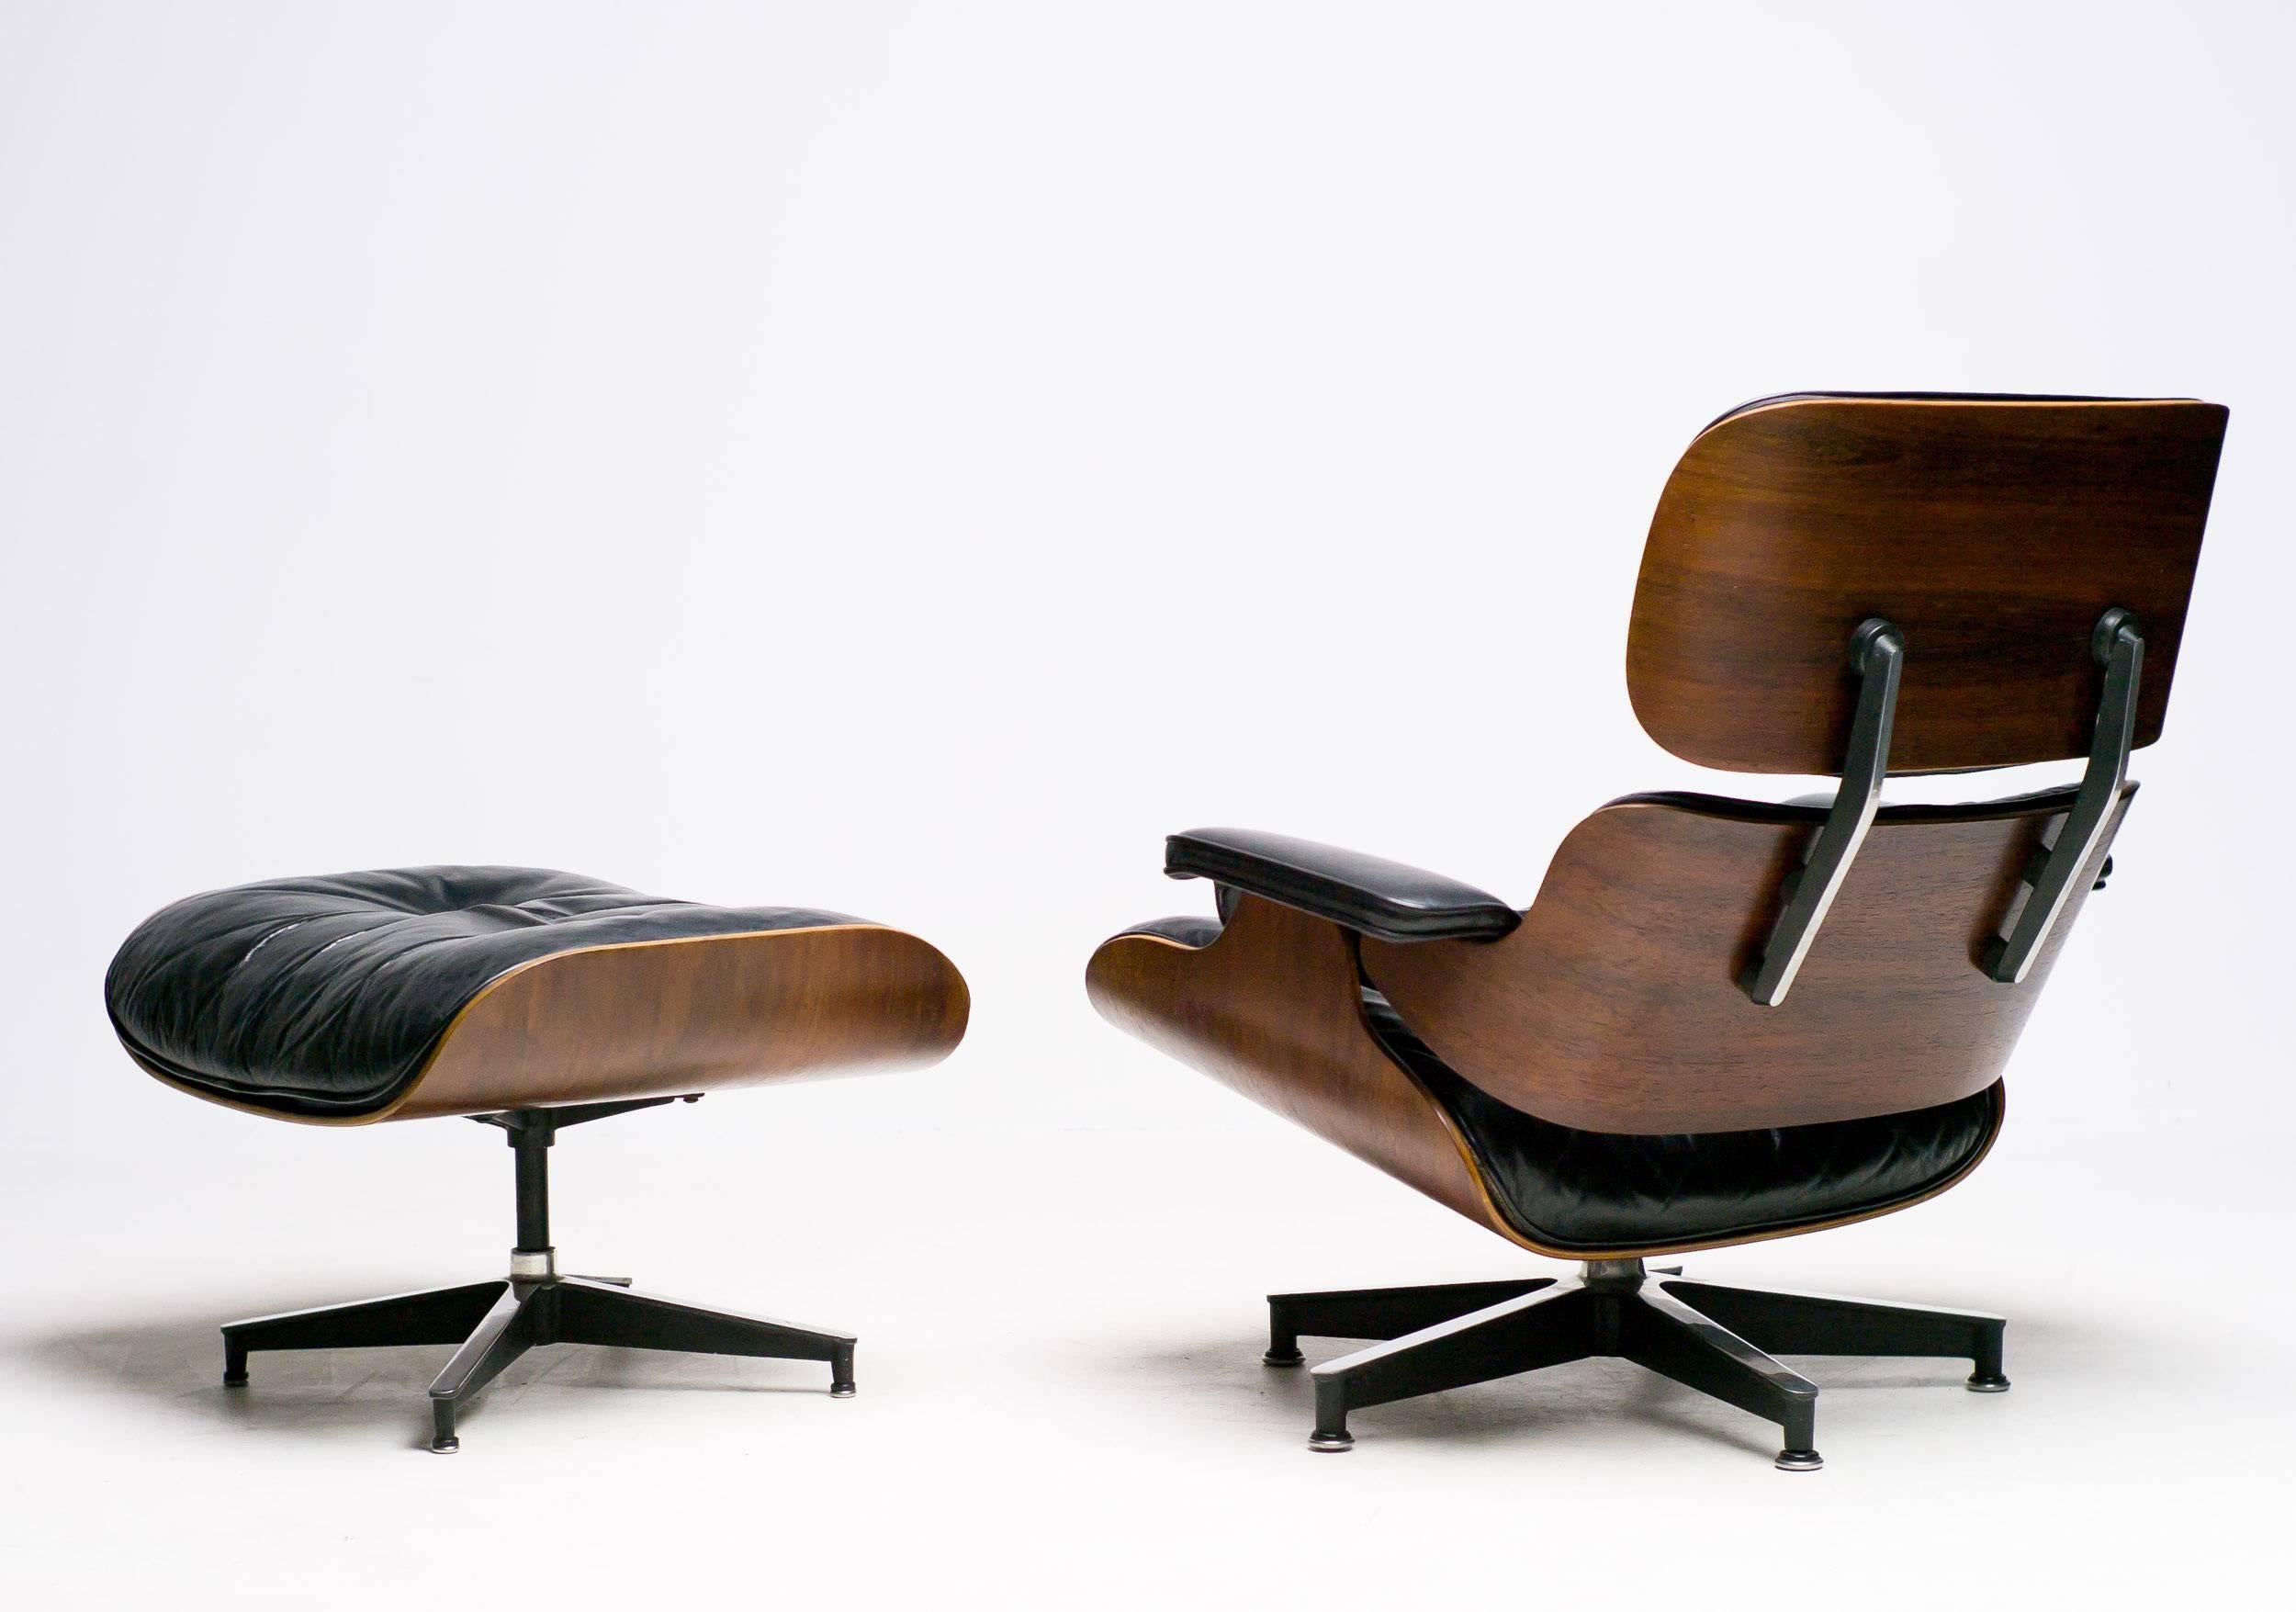 Rosewood lounge chair and ottoman designed by Charles and Ray Eames for Herman Miller, circa early 1960s. Original black leather. Beautiful all original condition.

Excellent fast and affordable worldwide shipping.
White glove delivery available